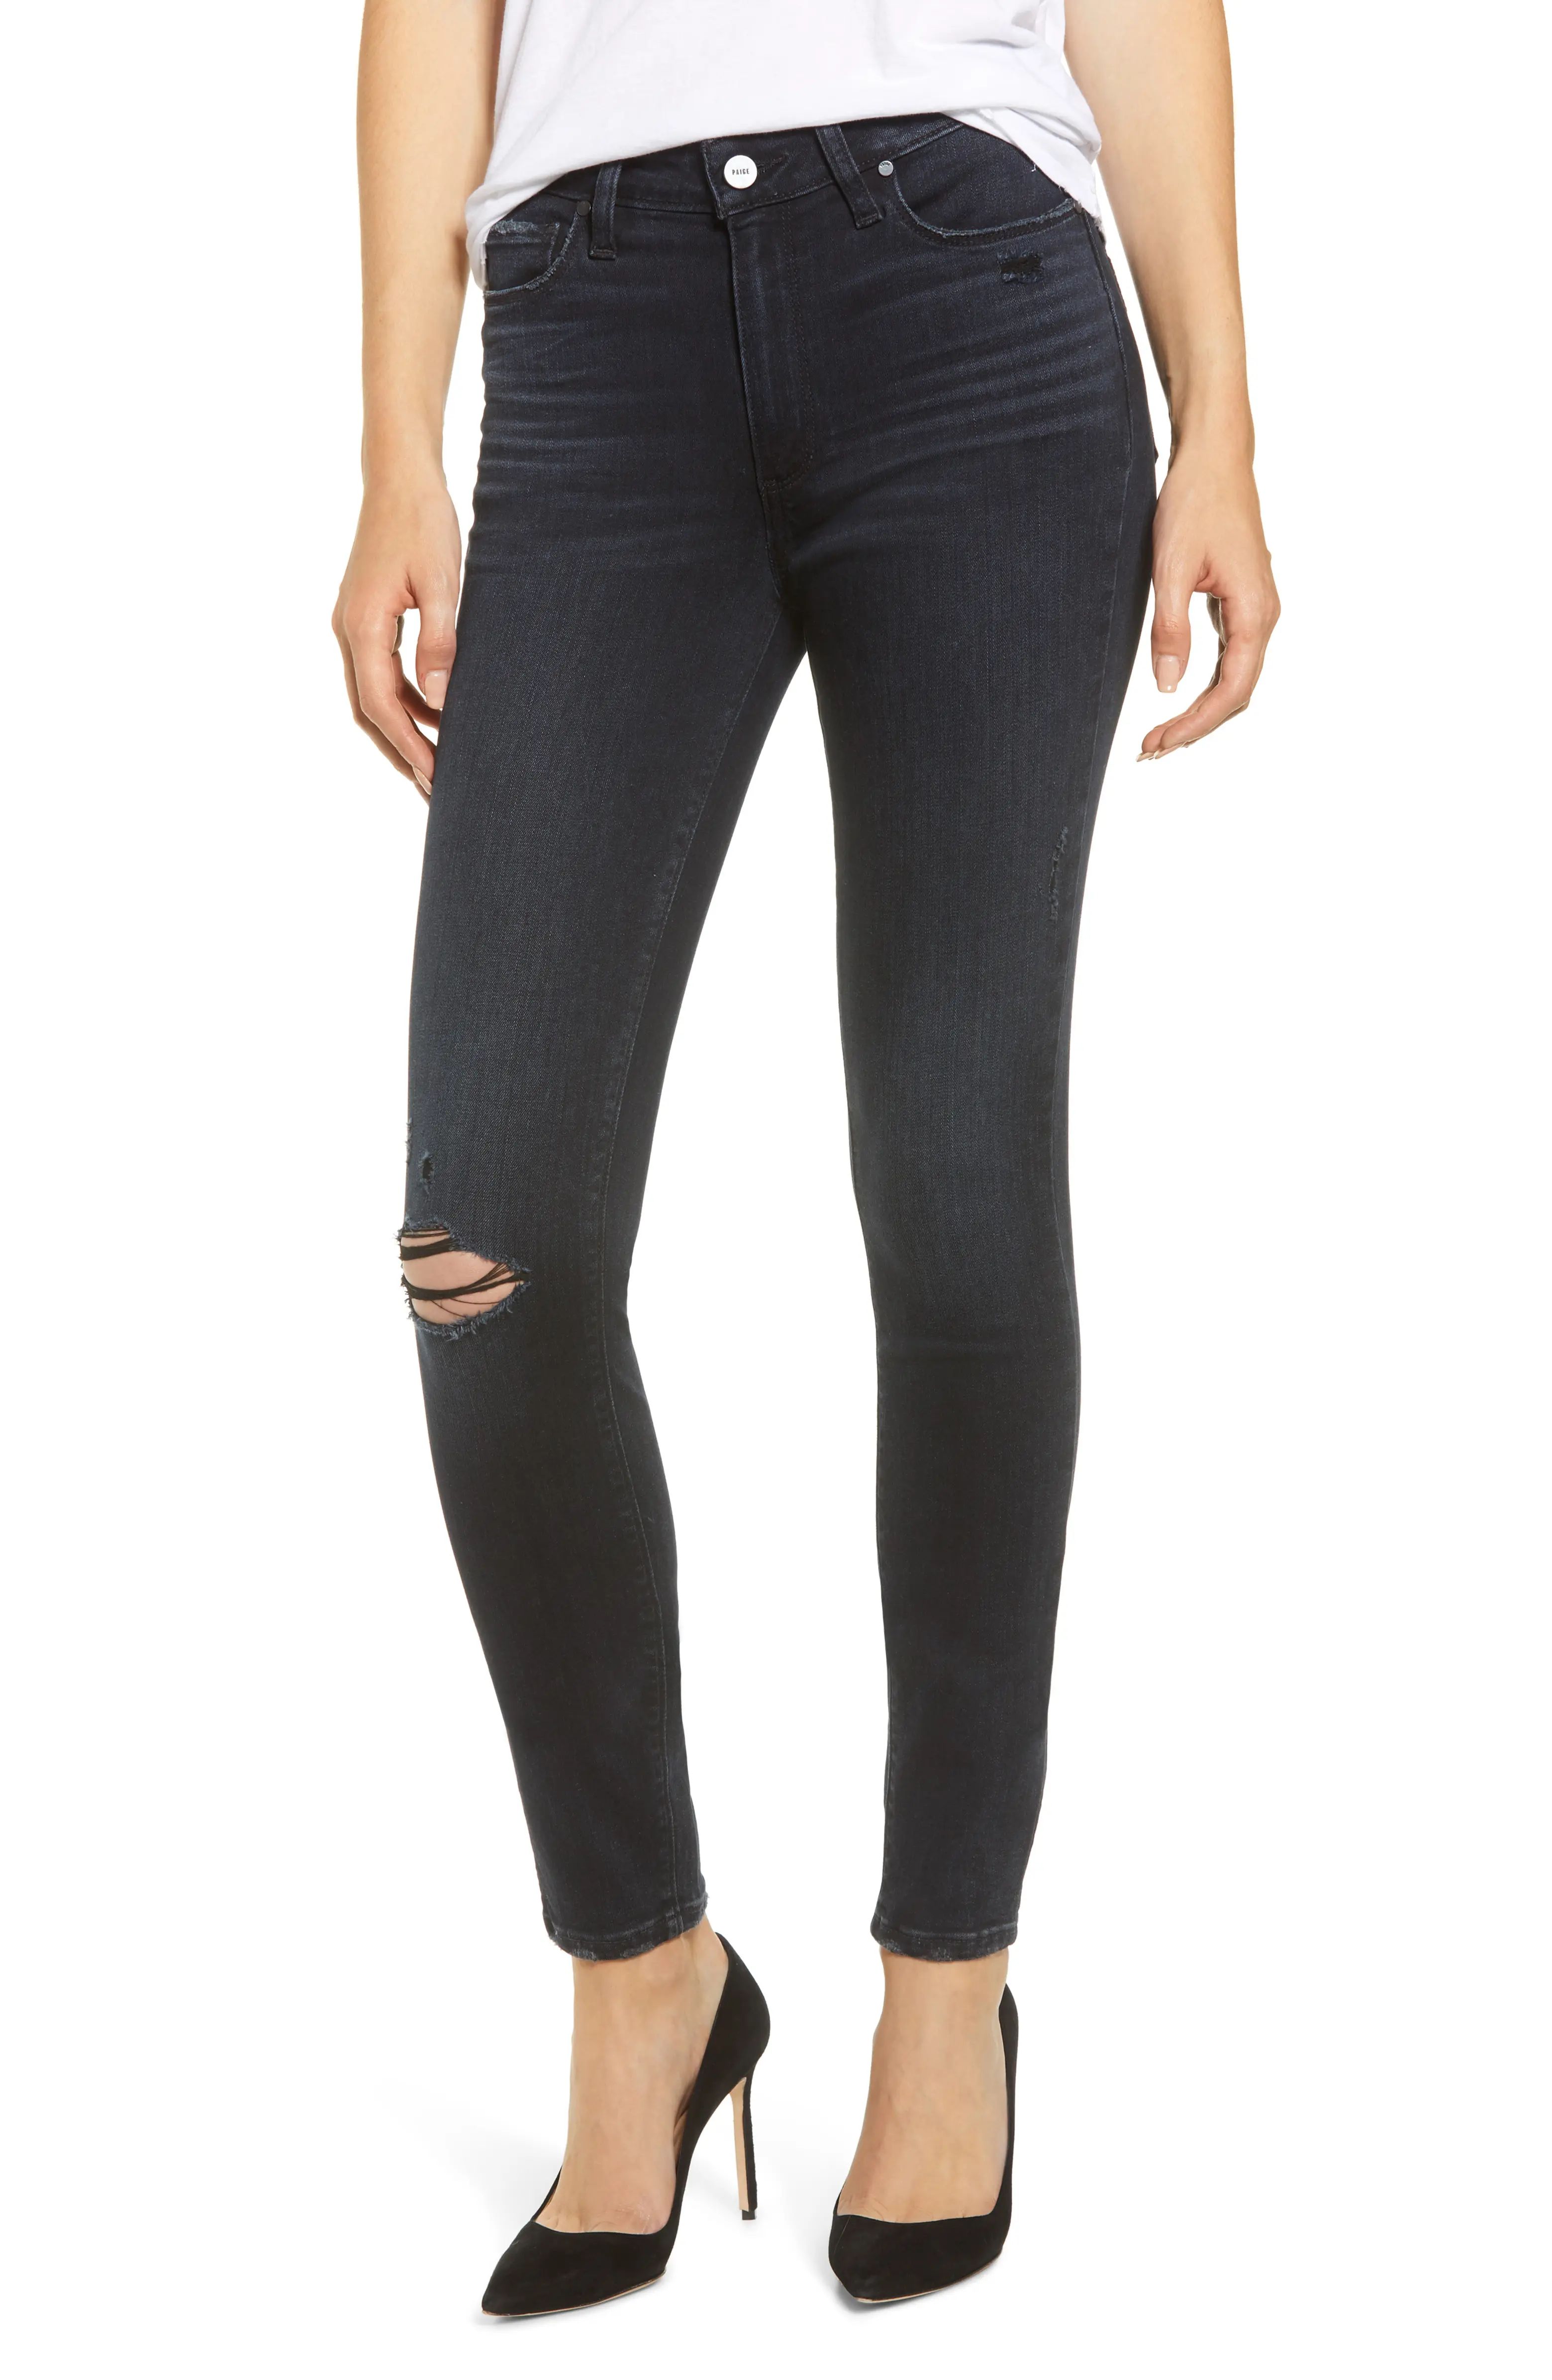 Transcend - Hoxton High Waist Ripped Ultra Skinny Jeans | Nordstrom